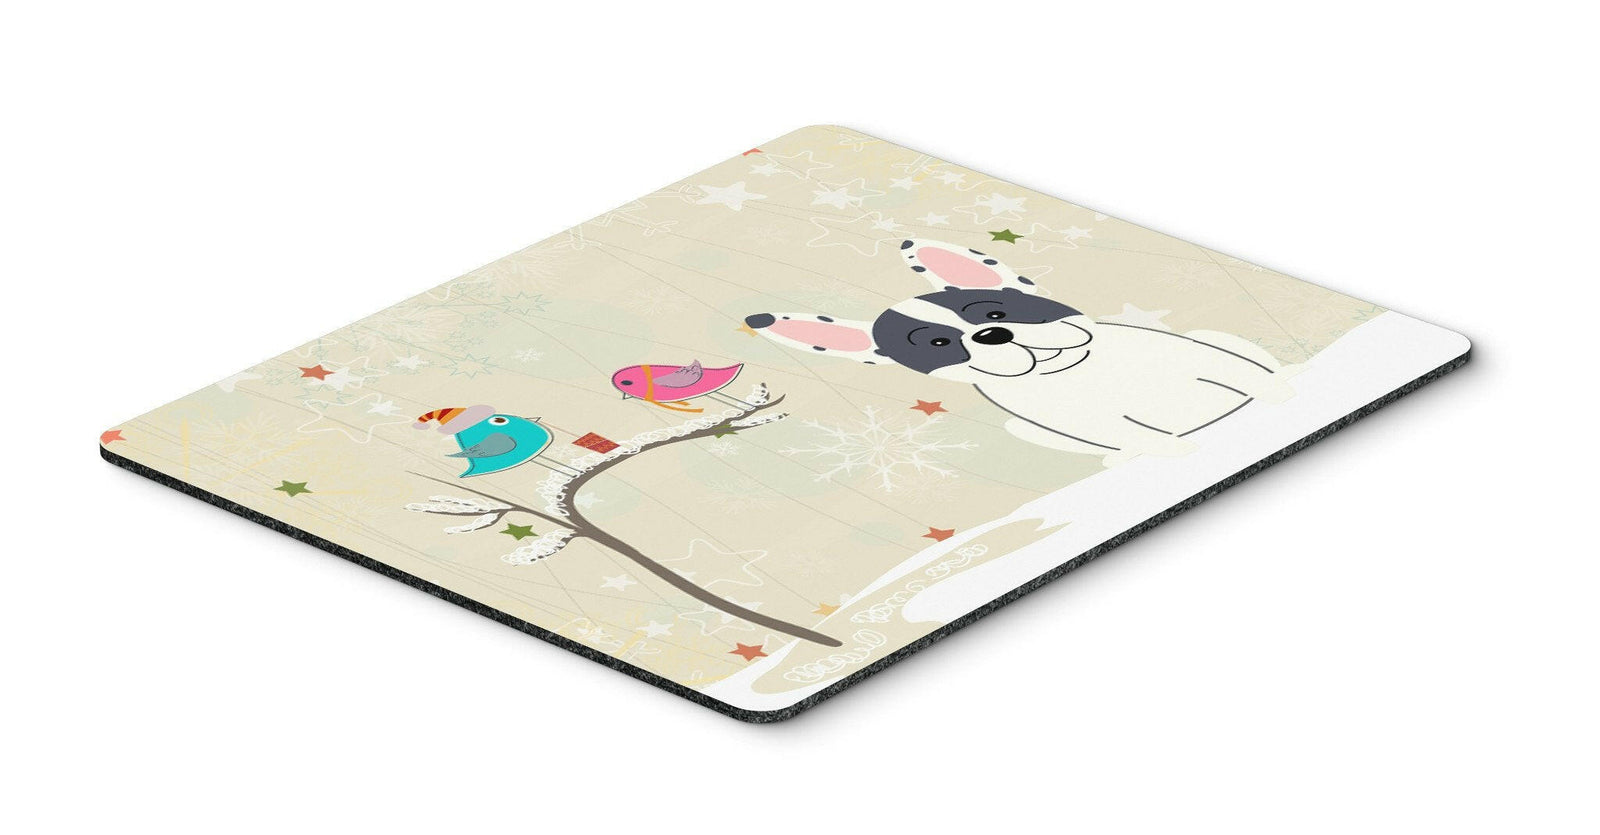 Christmas Presents between Friends French Bulldog Piebald Mouse Pad, Hot Pad or Trivet BB2483MP by Caroline's Treasures